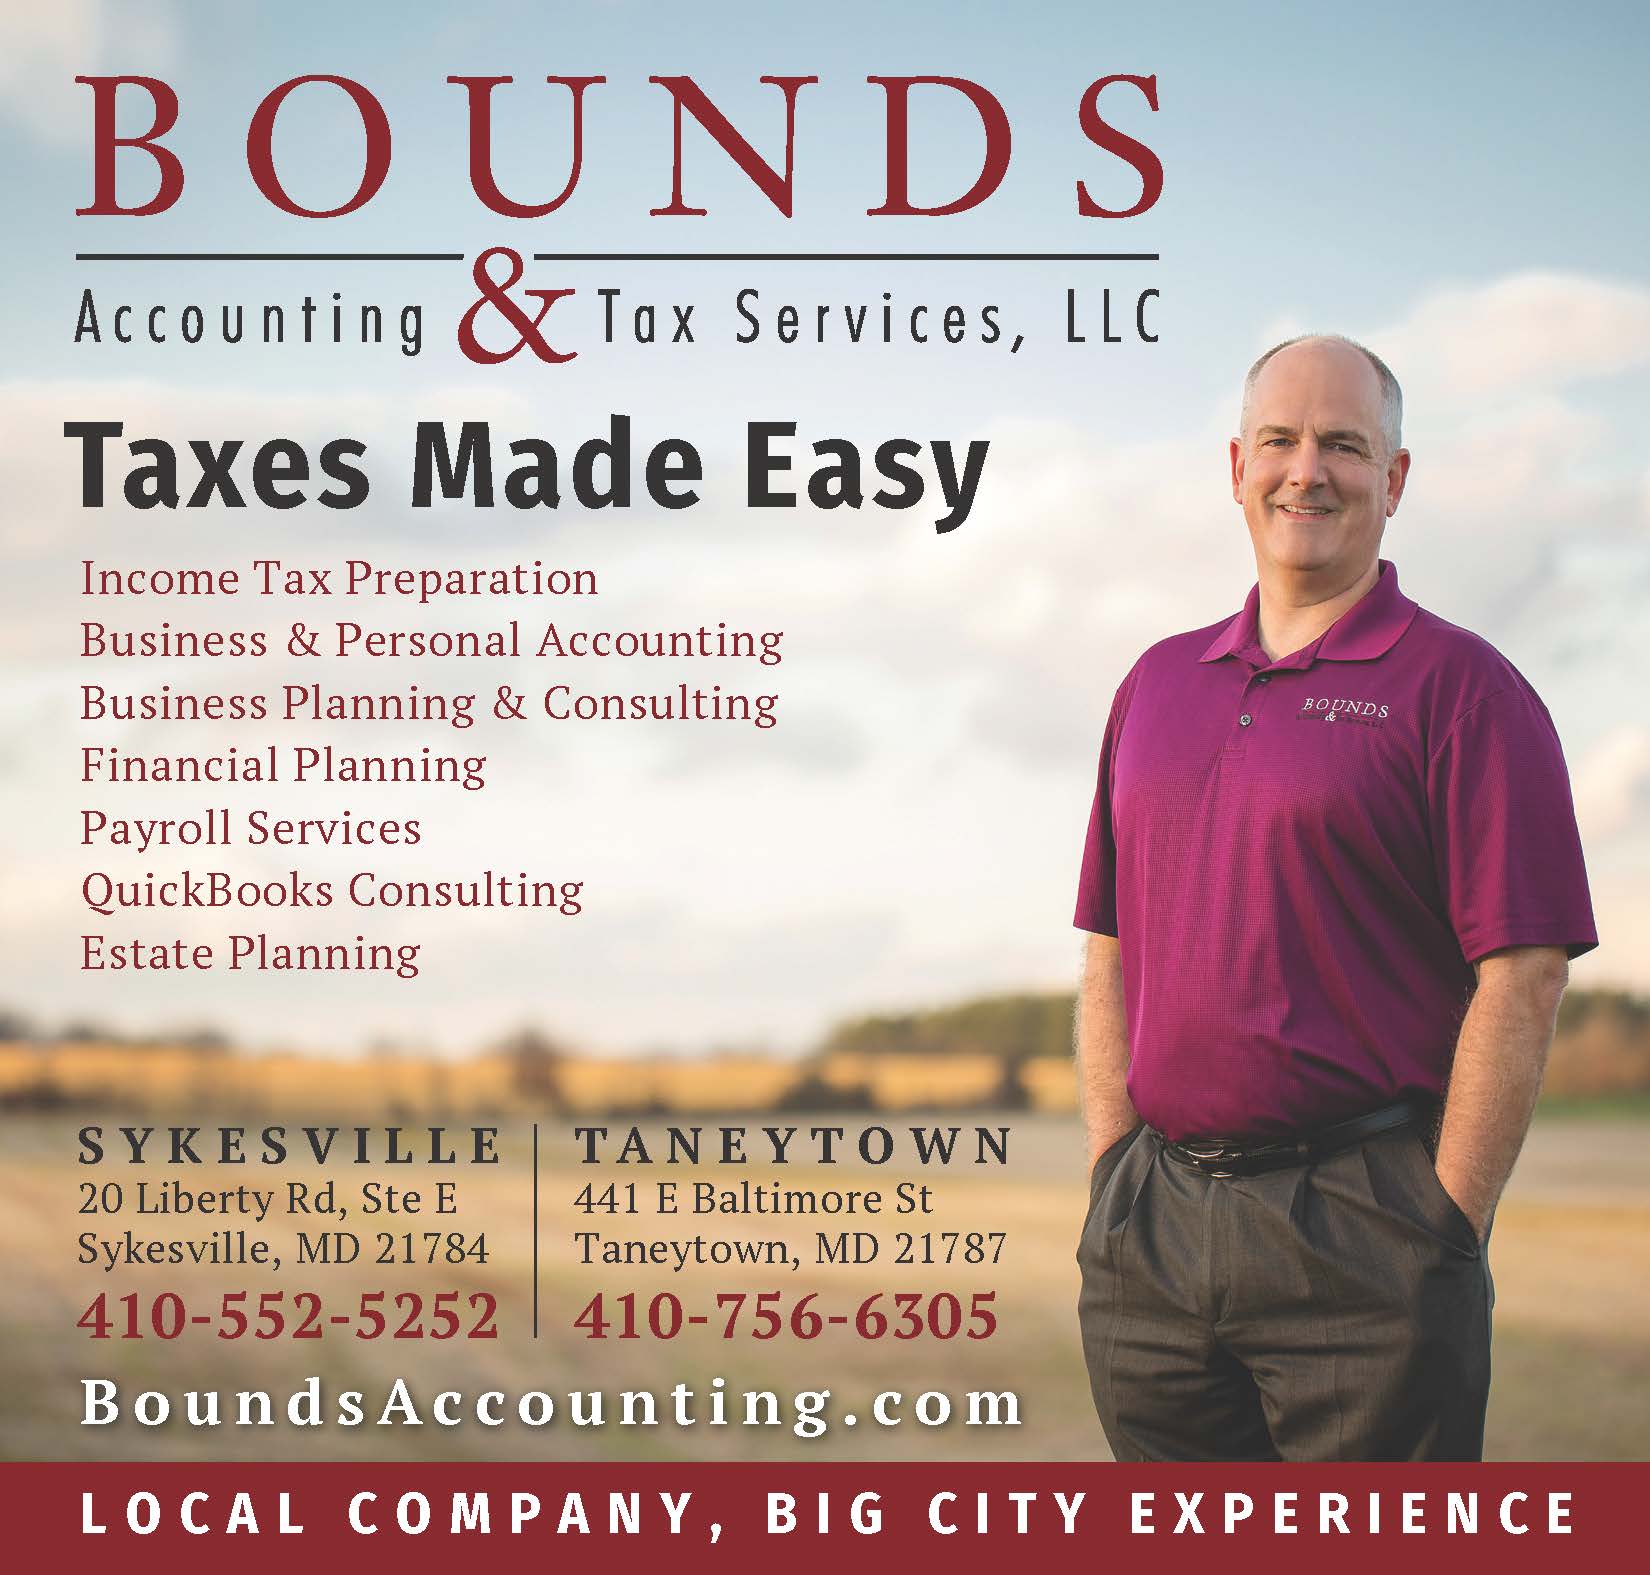 Bounds Accounting & Tax Services, LLC 441 E Baltimore St, Taneytown Maryland 21787